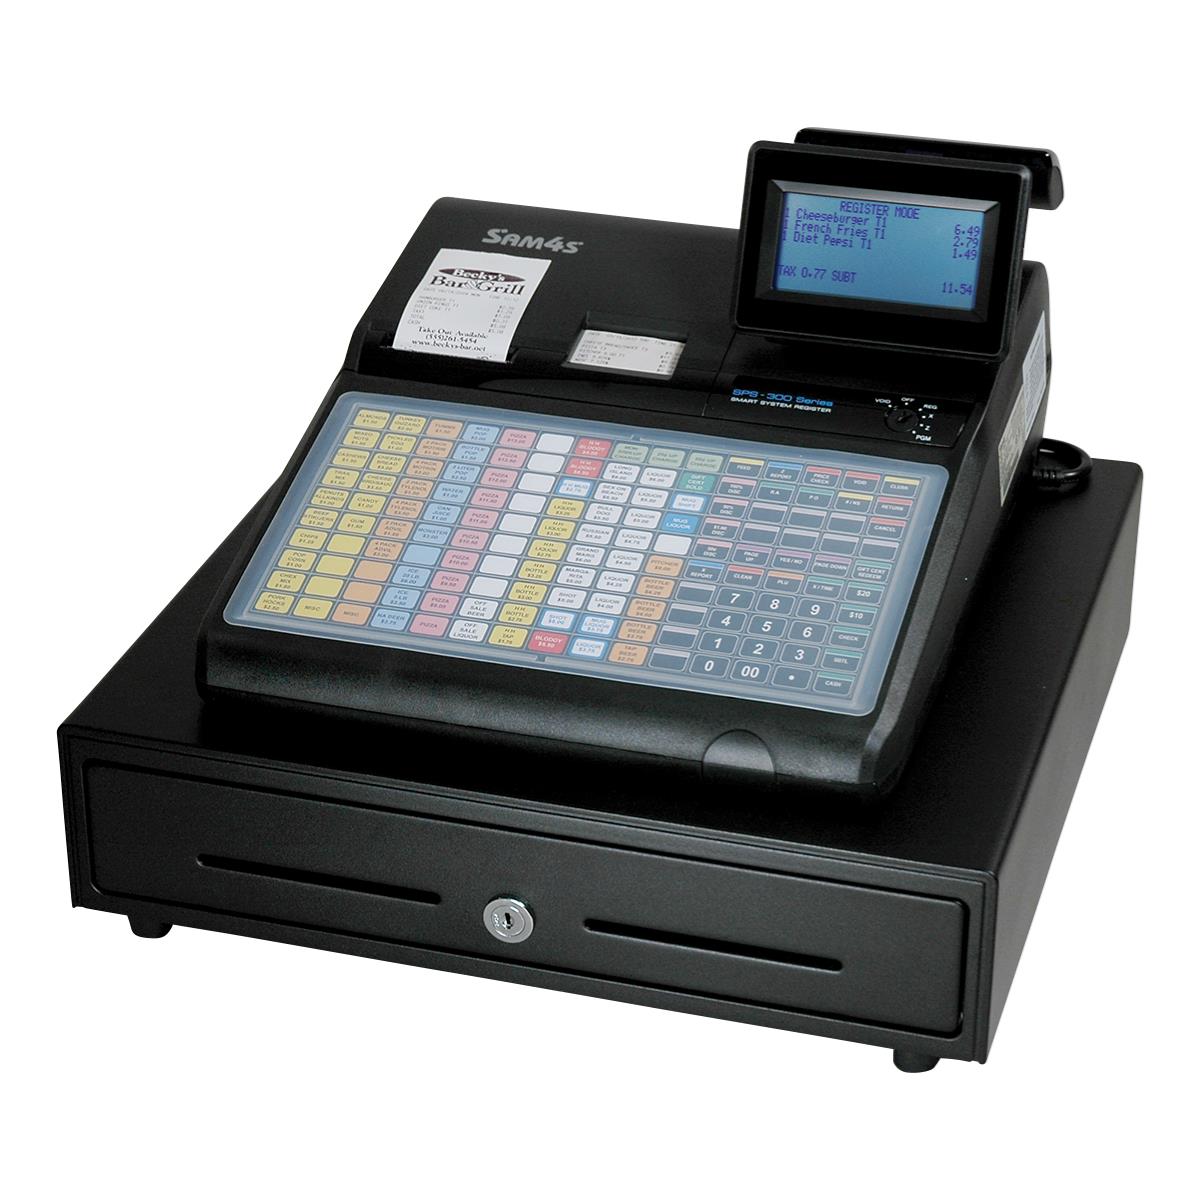 Electronic cash register with a digital display, numeric keypad, and multiple function buttons, mounted on a black drawer.